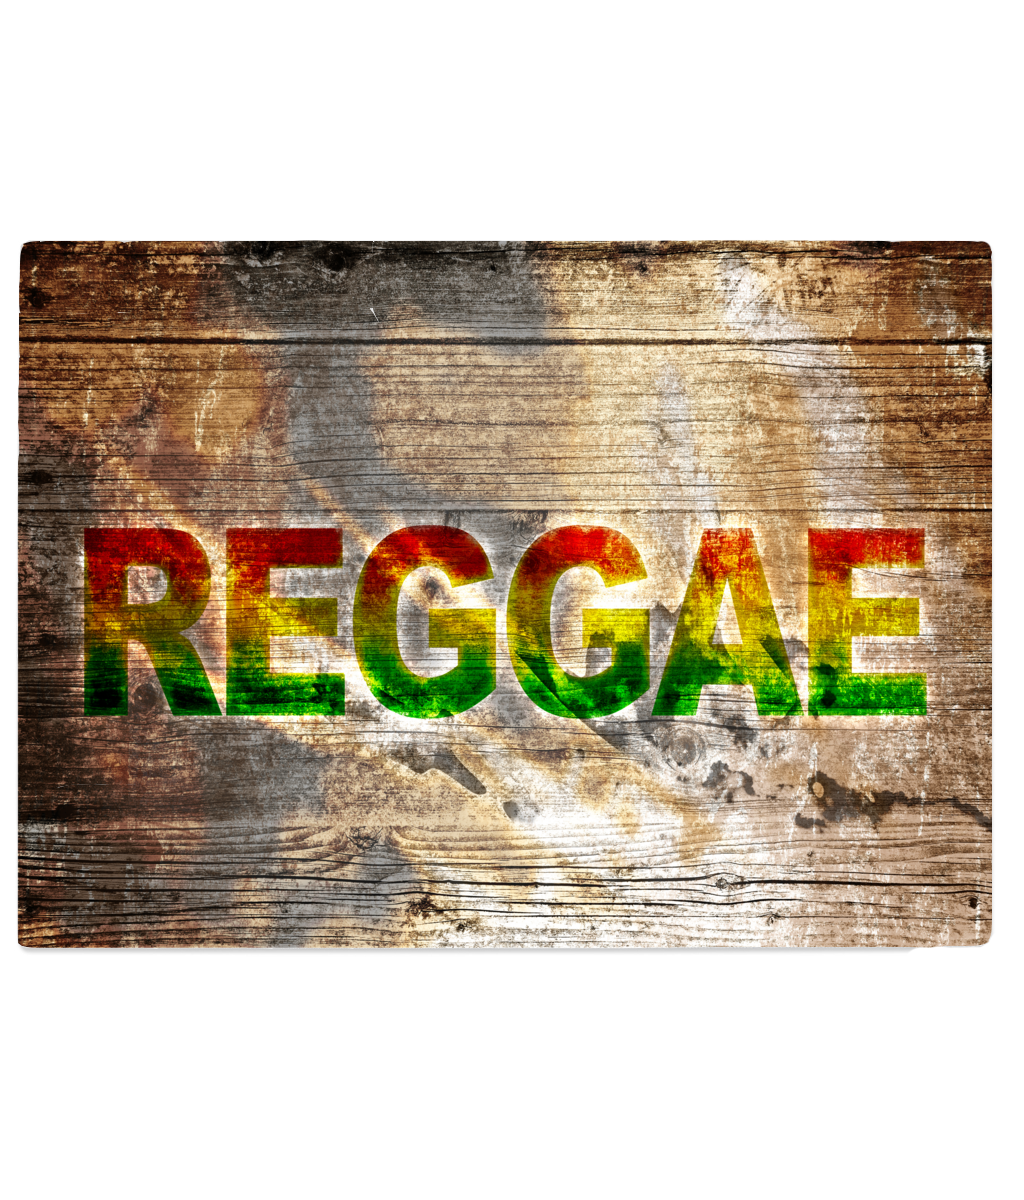 Reggae - Tempered Glass Chopping Board - FAST UK DELIVERY